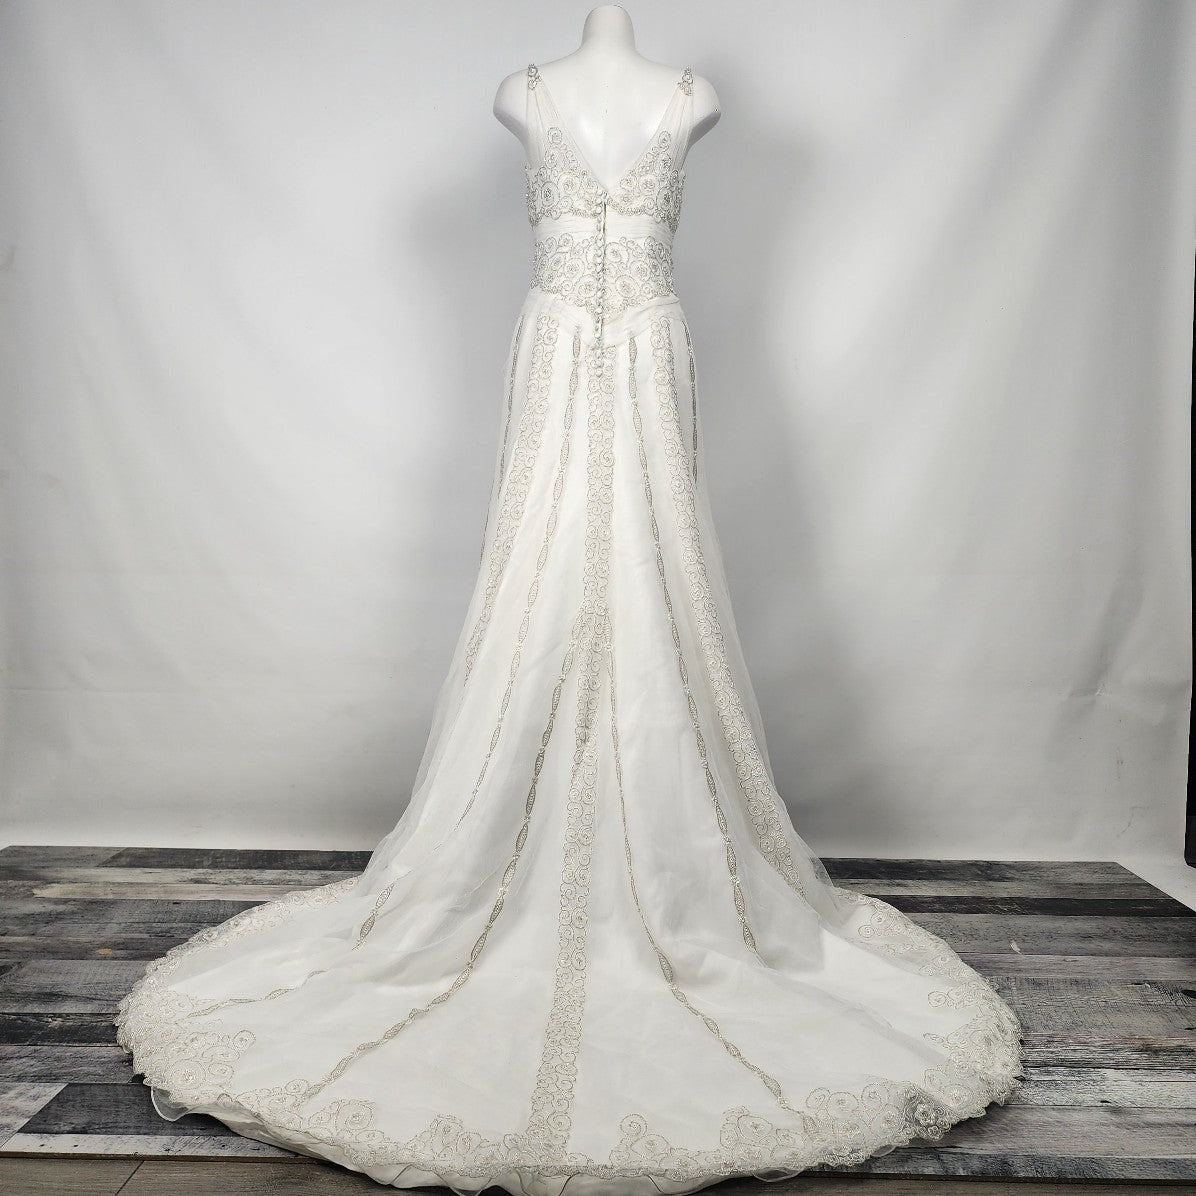 Mori Lee Silver Embroidered Sequined Lace Wedding Gown Size S/M